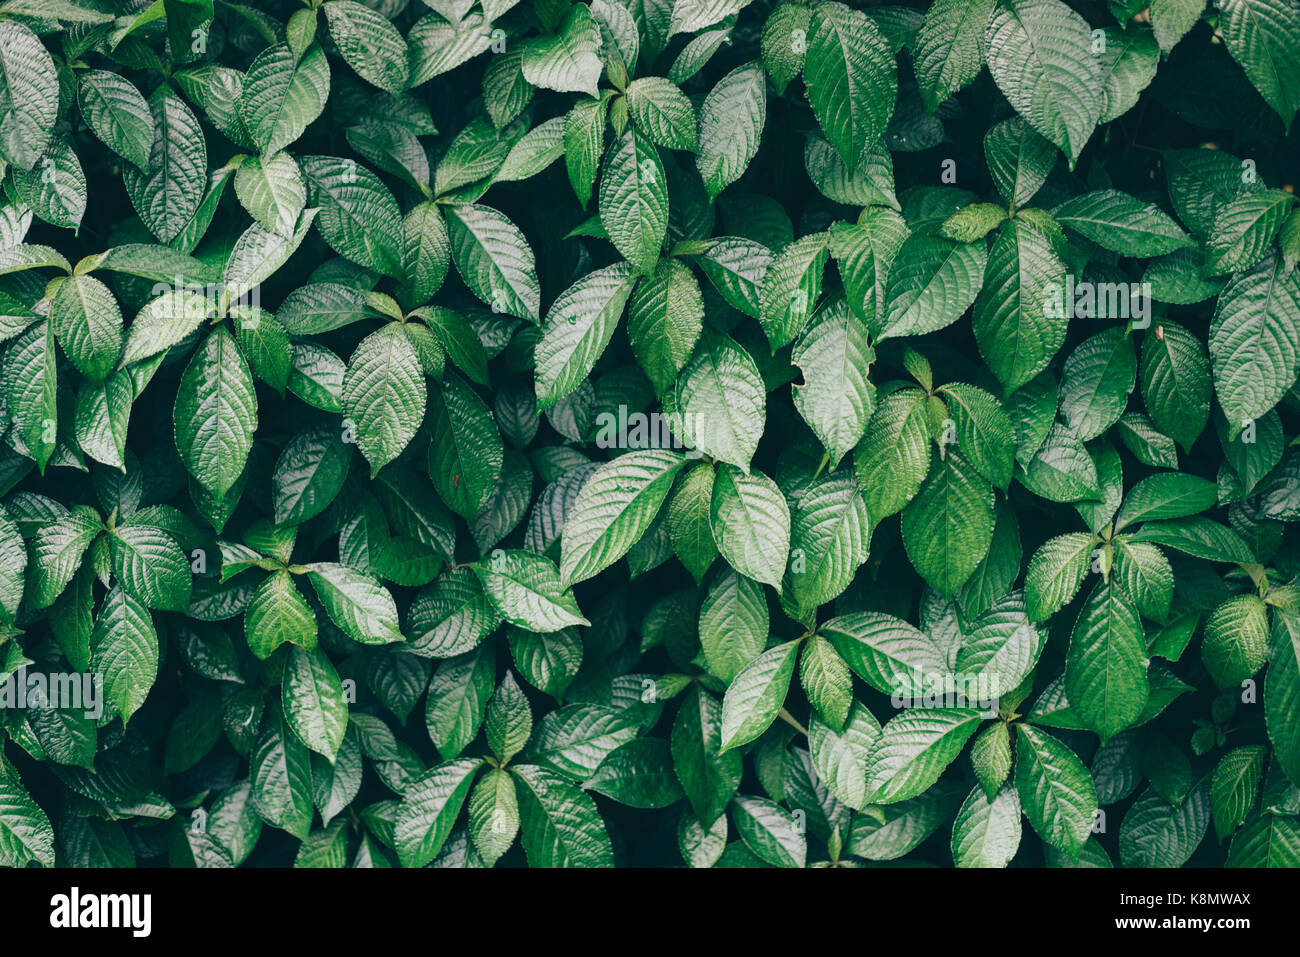 photo of green     space Stock Photo - Alamy